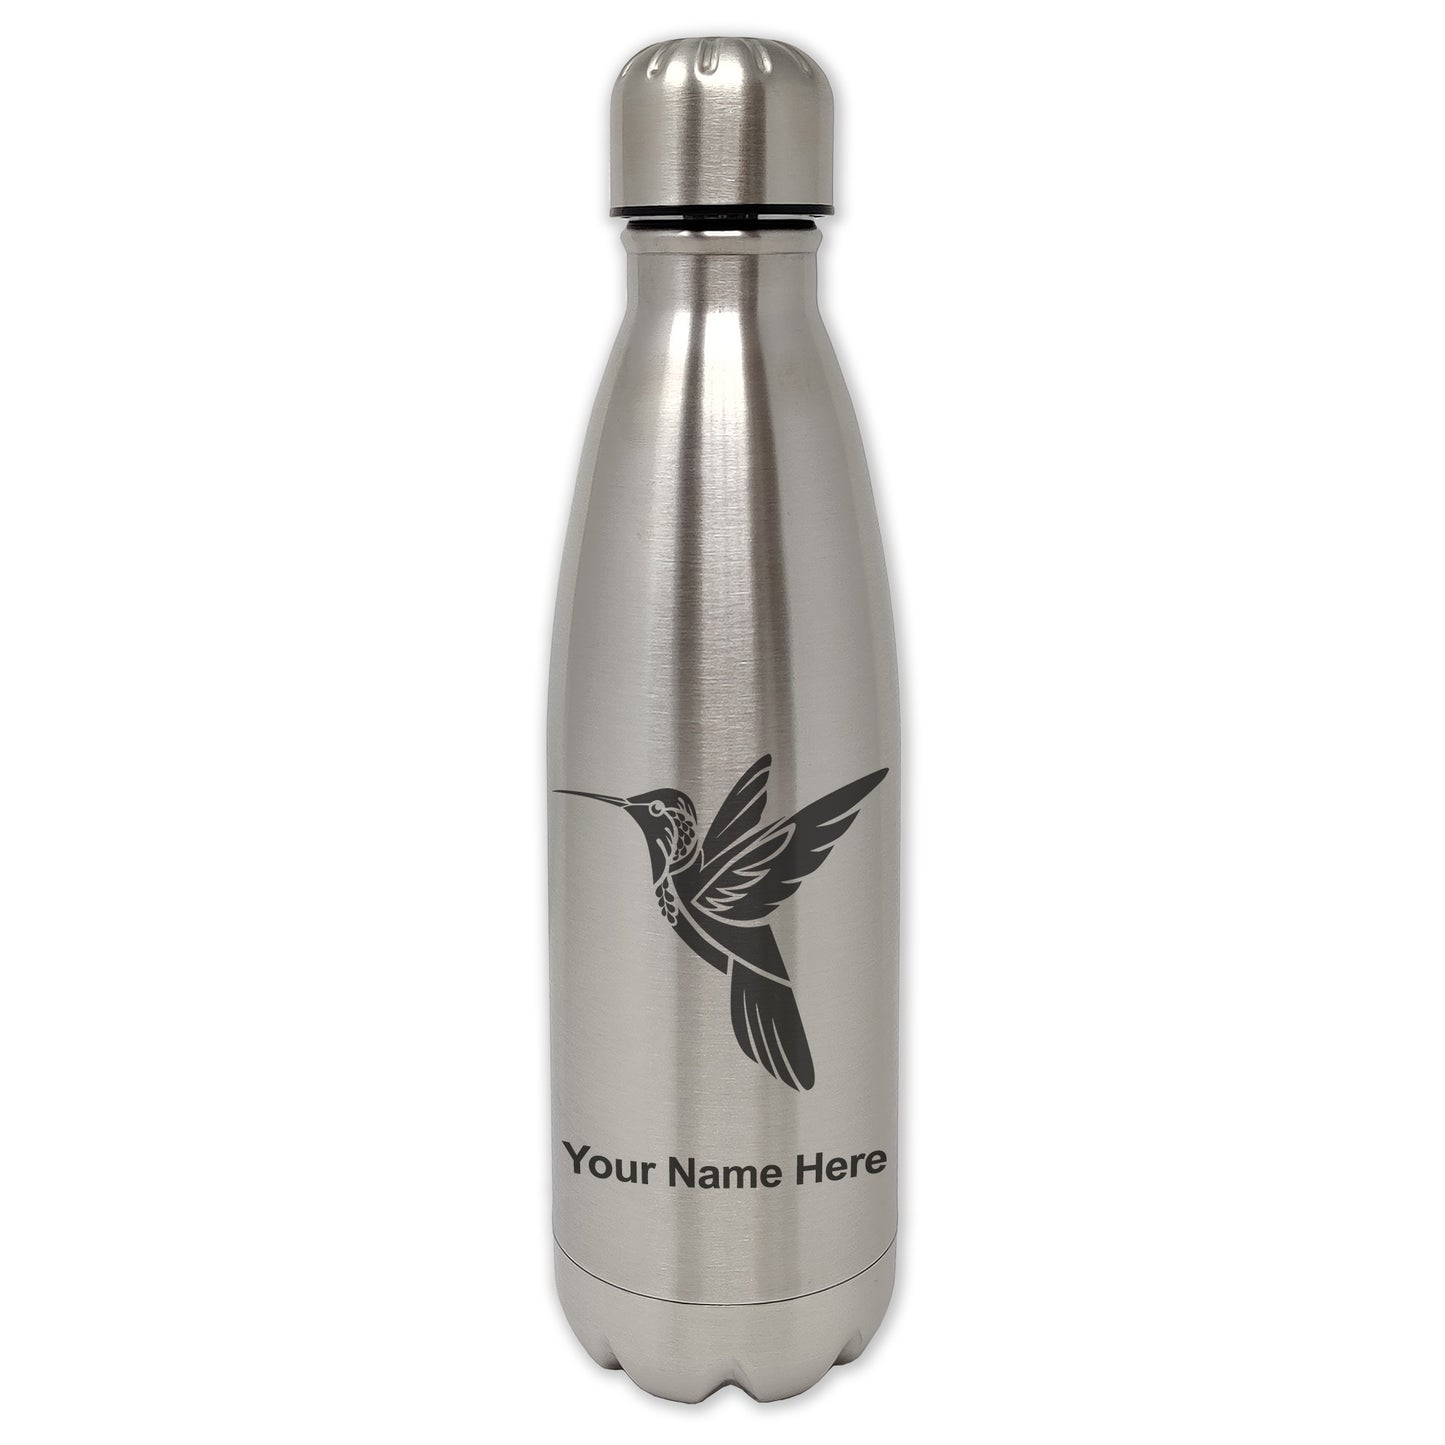 LaserGram Single Wall Water Bottle, Hummingbird, Personalized Engraving Included